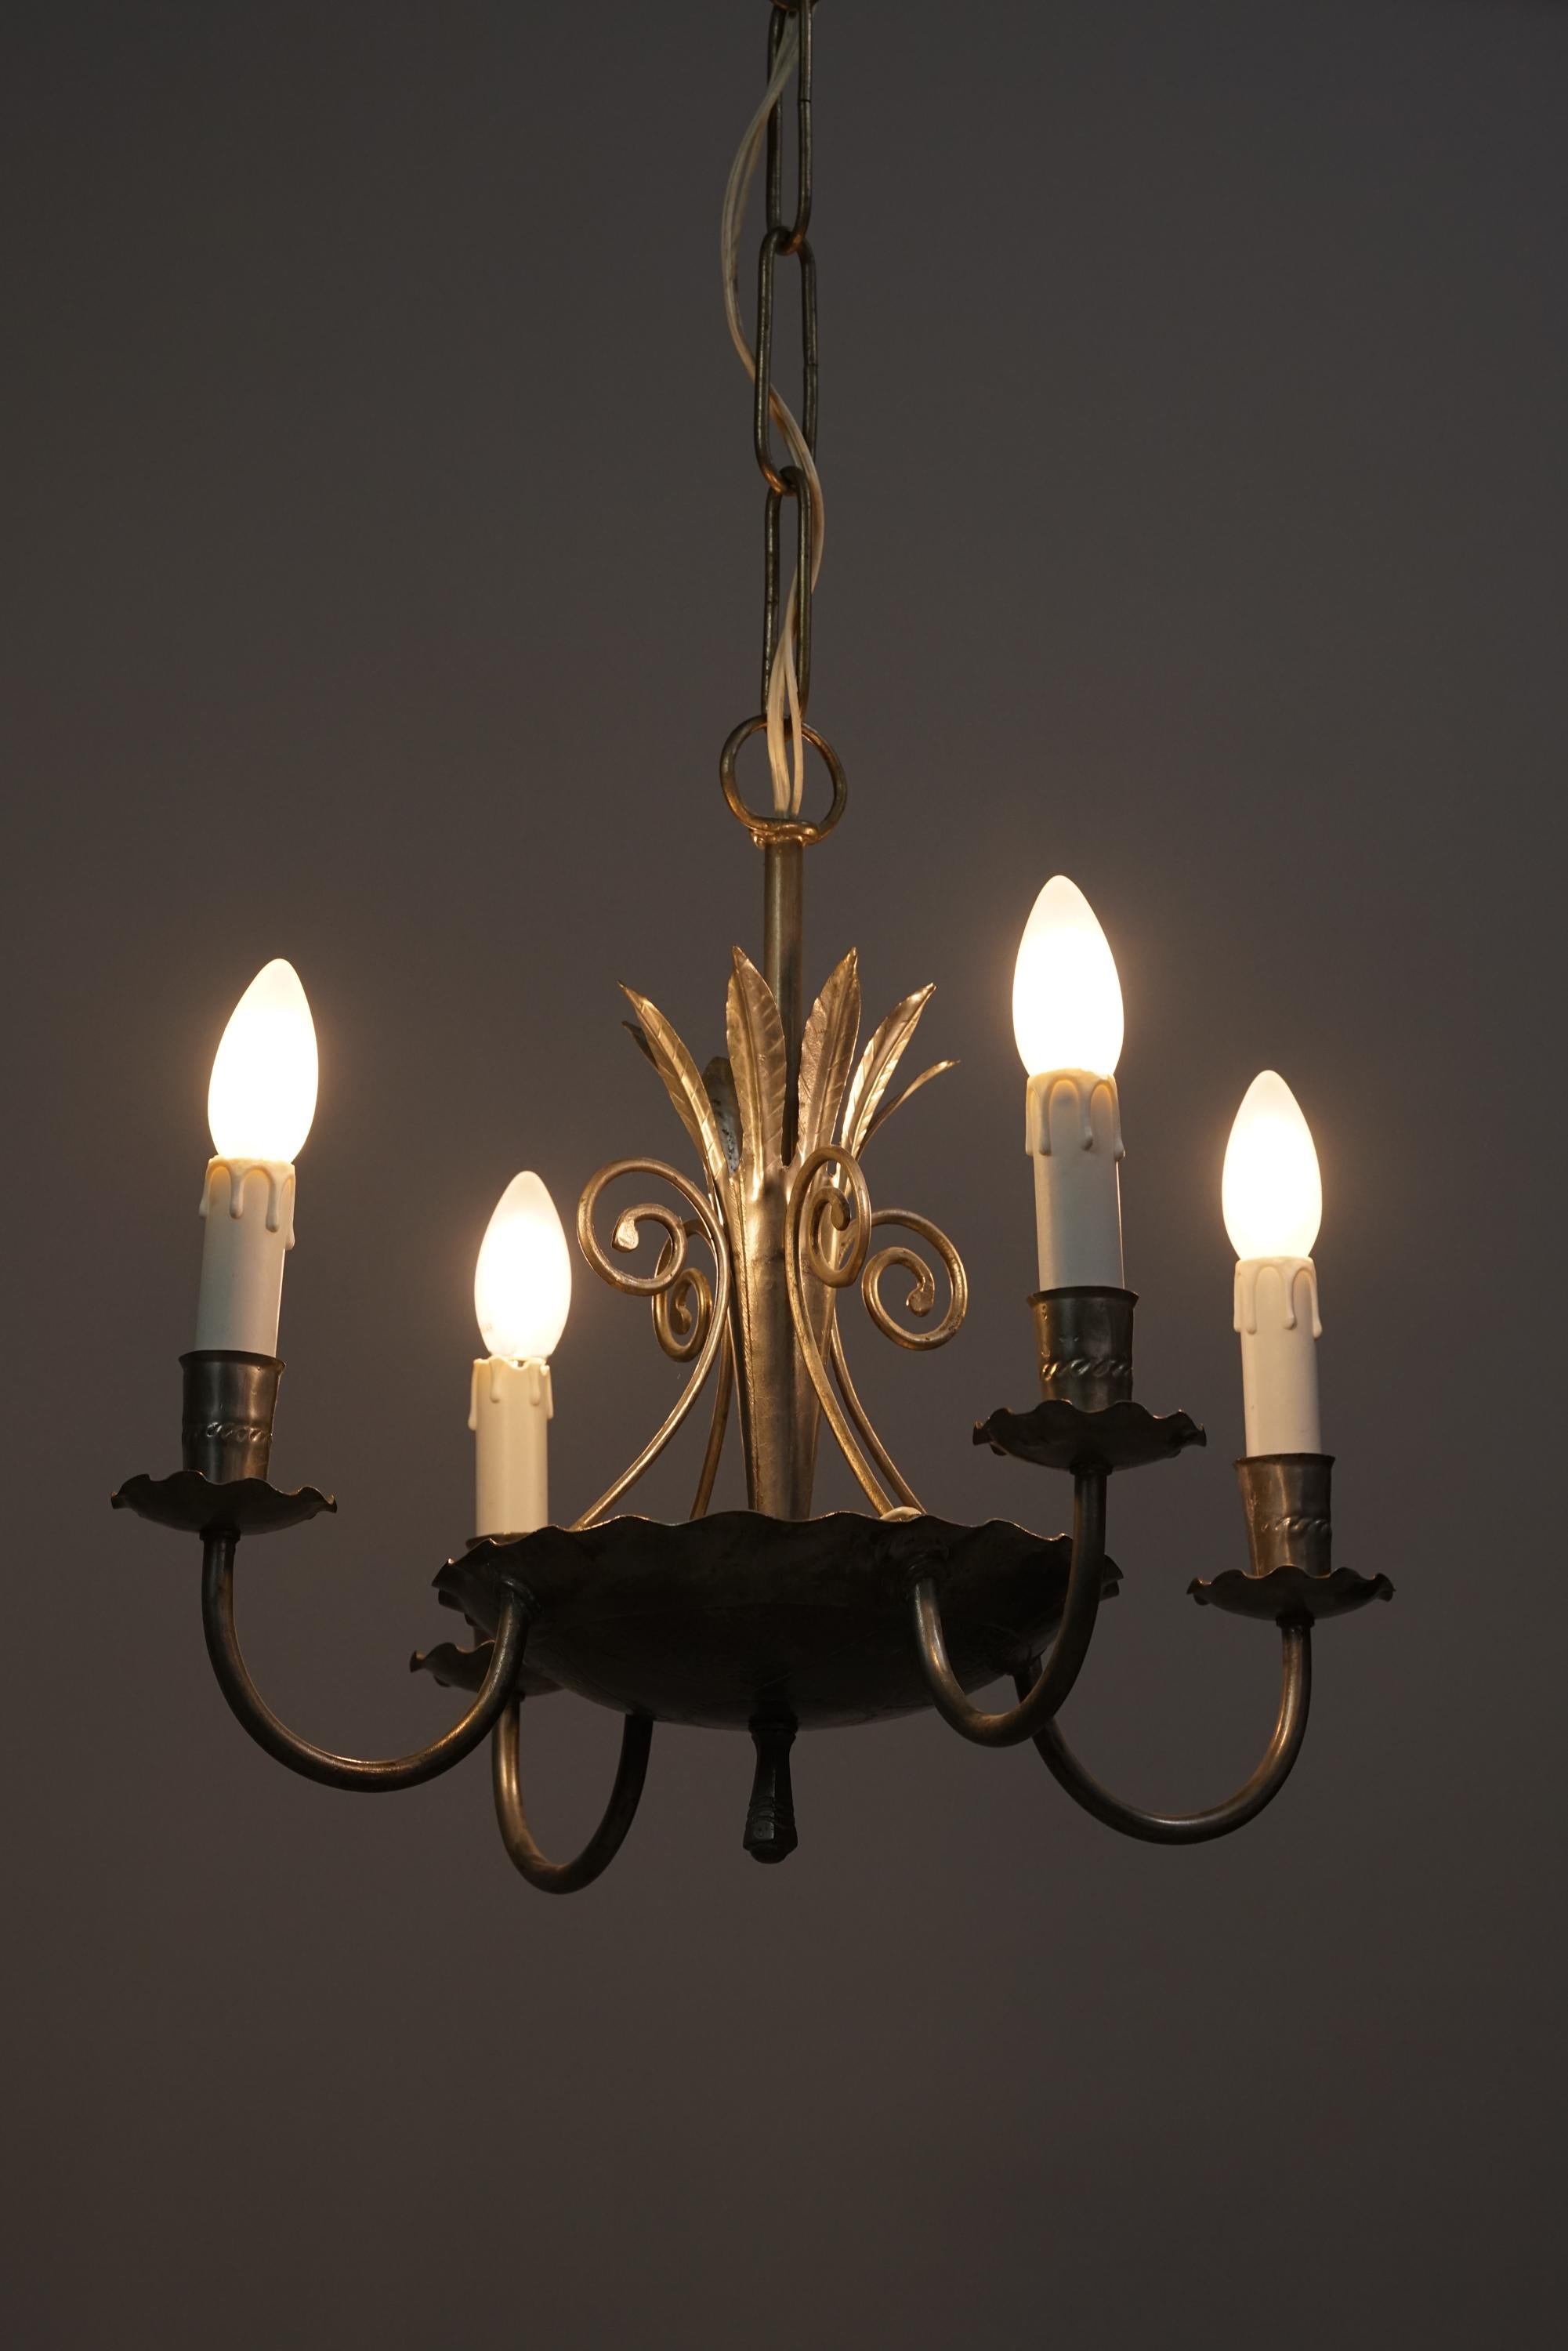 Rare Finnish iron chandelier from the 1940s, possibly manufactured by Taito Oy, attributed to Paavo Tynell. Forged iron, beautiful intricate details, good vintage condition, minor wear consistent with age and use.